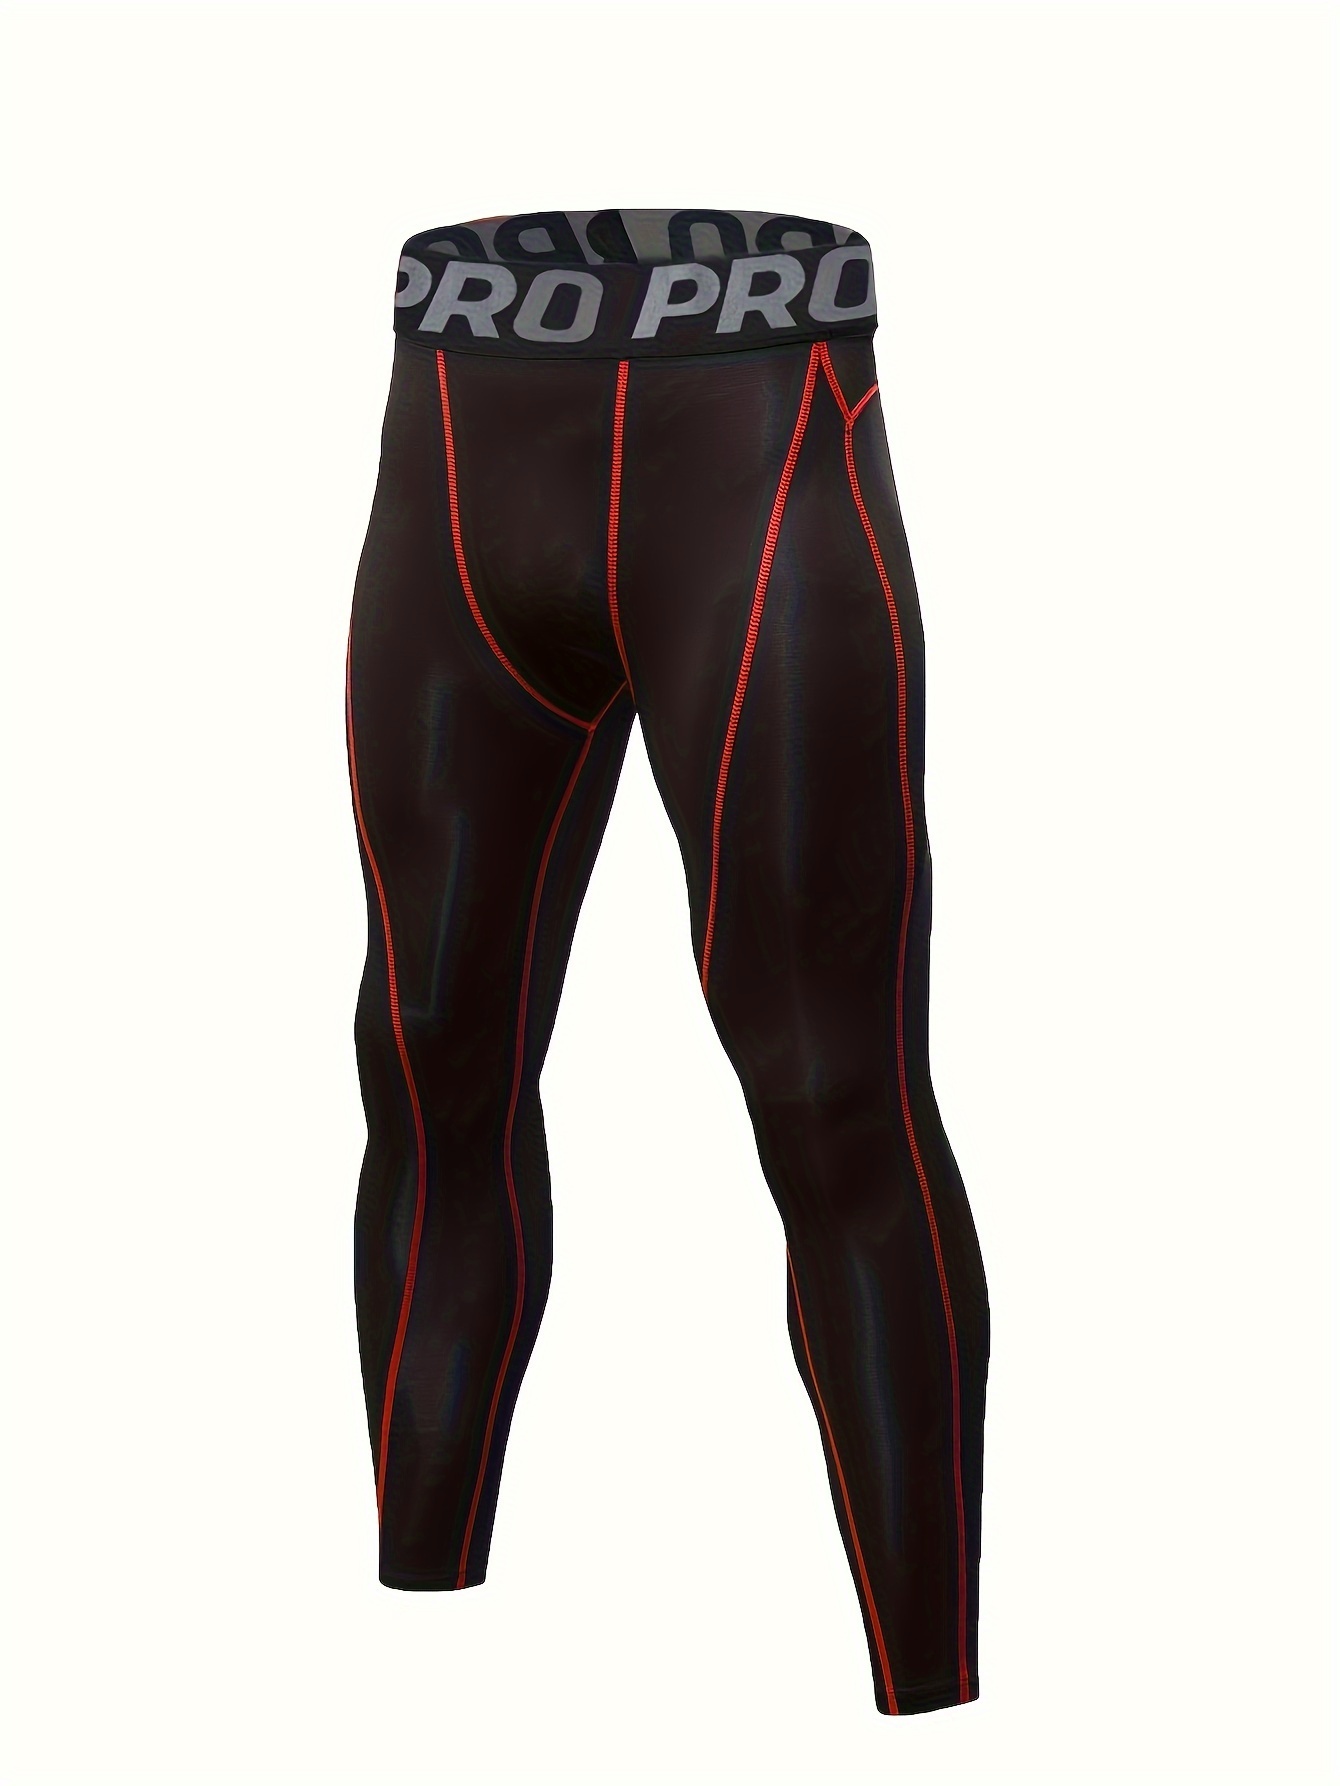 Men's Thermal Pants Tight Compression Fleeced Base Layer Men